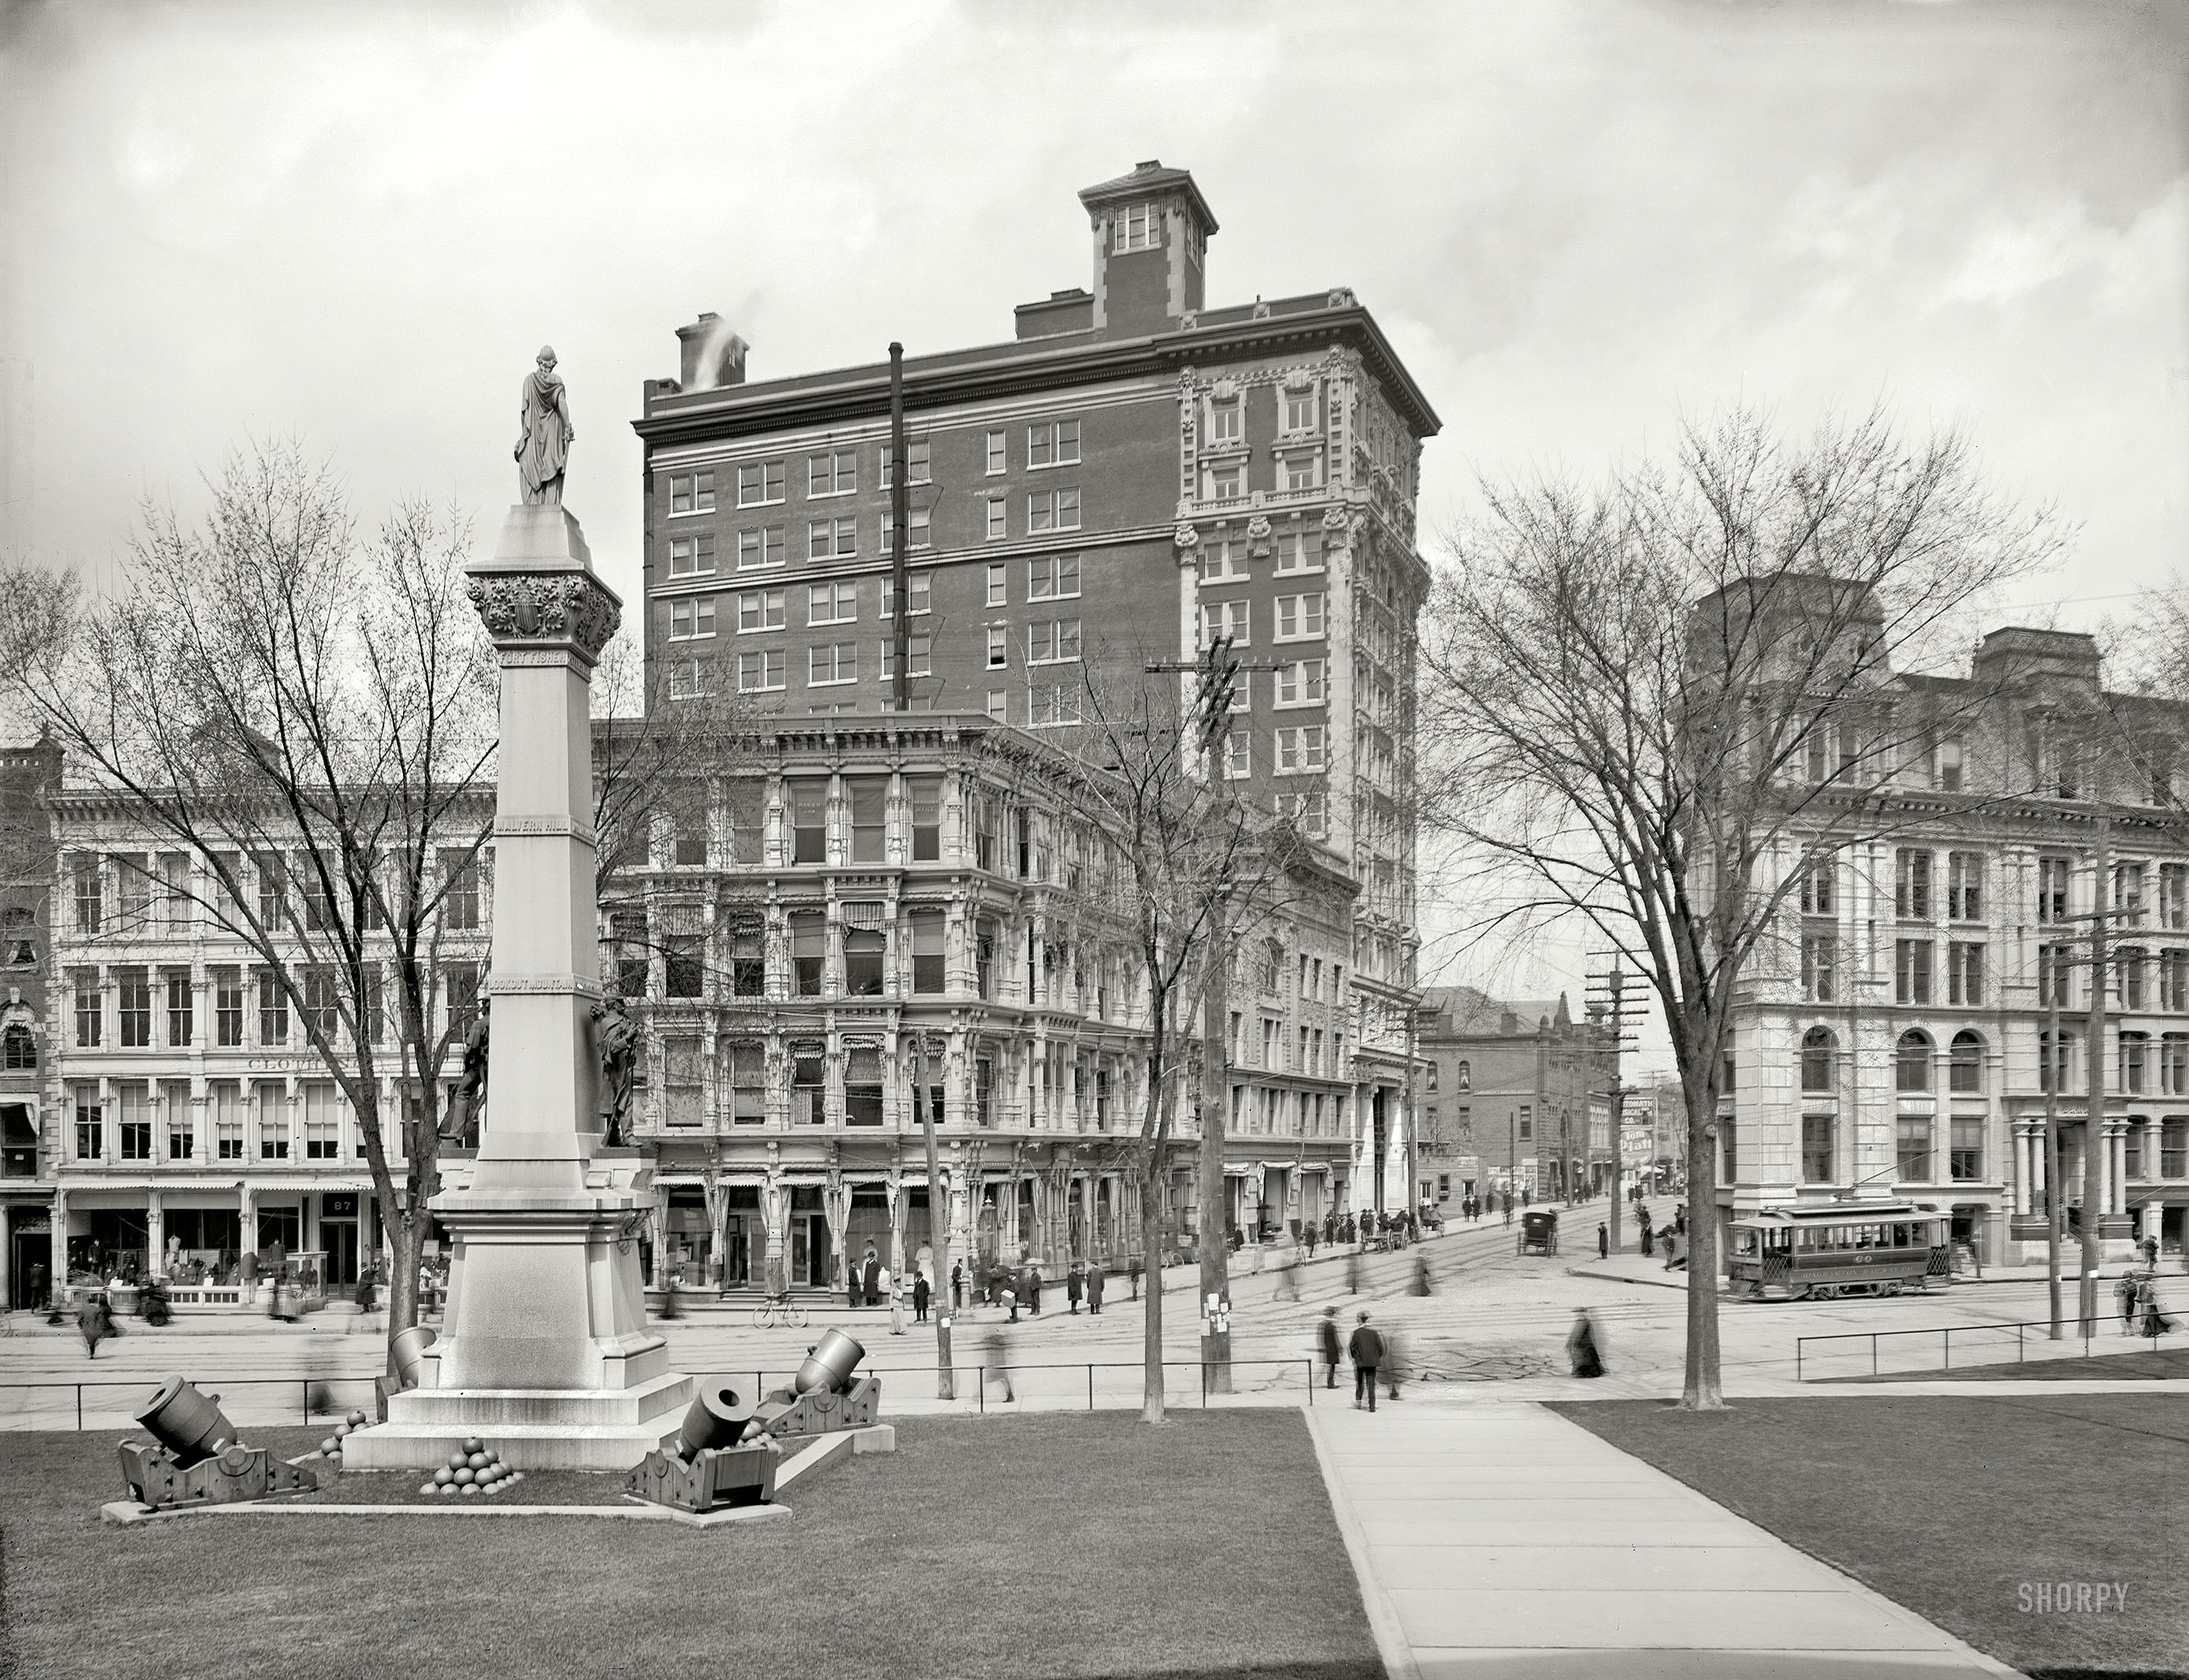 Circa 1905. "Court and Chenango streets, Binghamton, New York." The Kilmer Building center stage. 8x10 glass negative, Detroit Publishing Co. View full size.